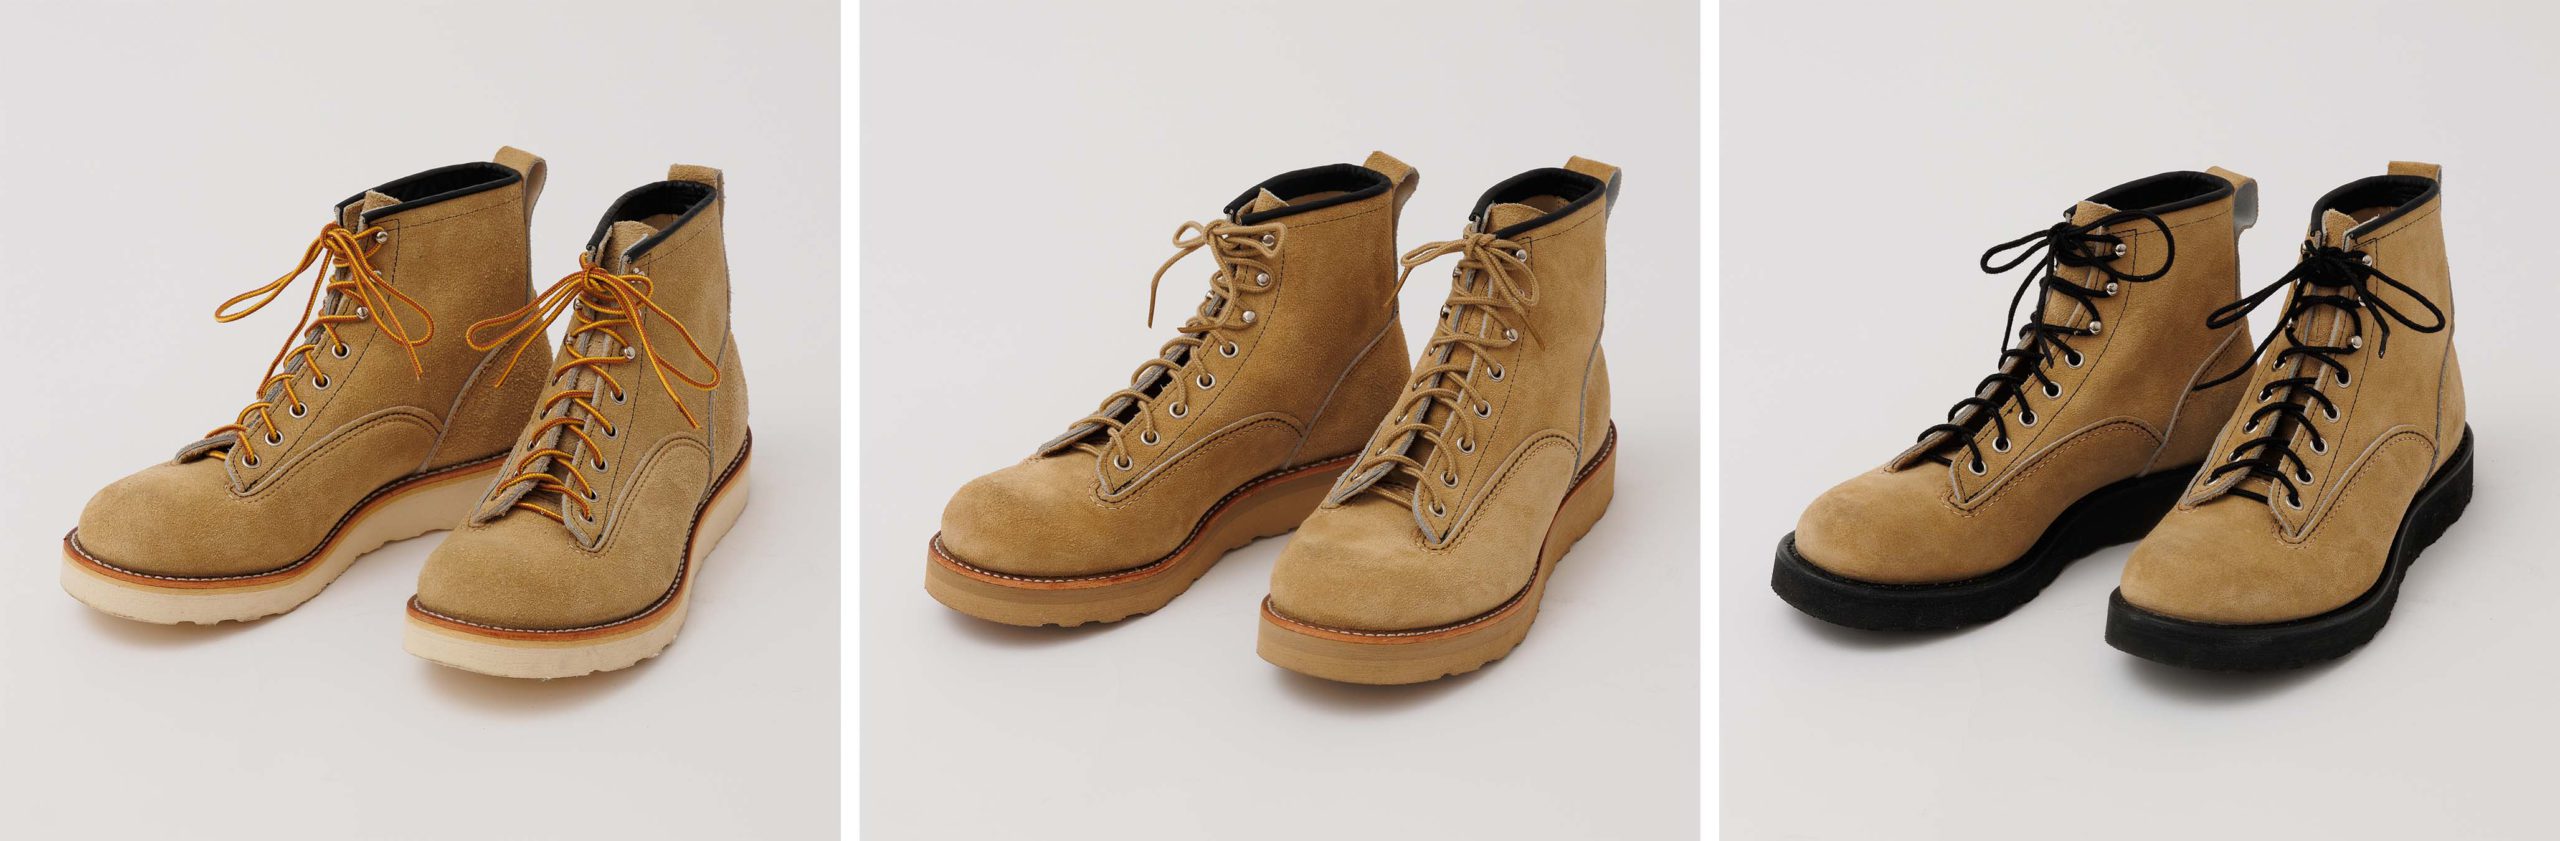 red wing nonnative 藤井隆行監修 biotop 8167 - 靴